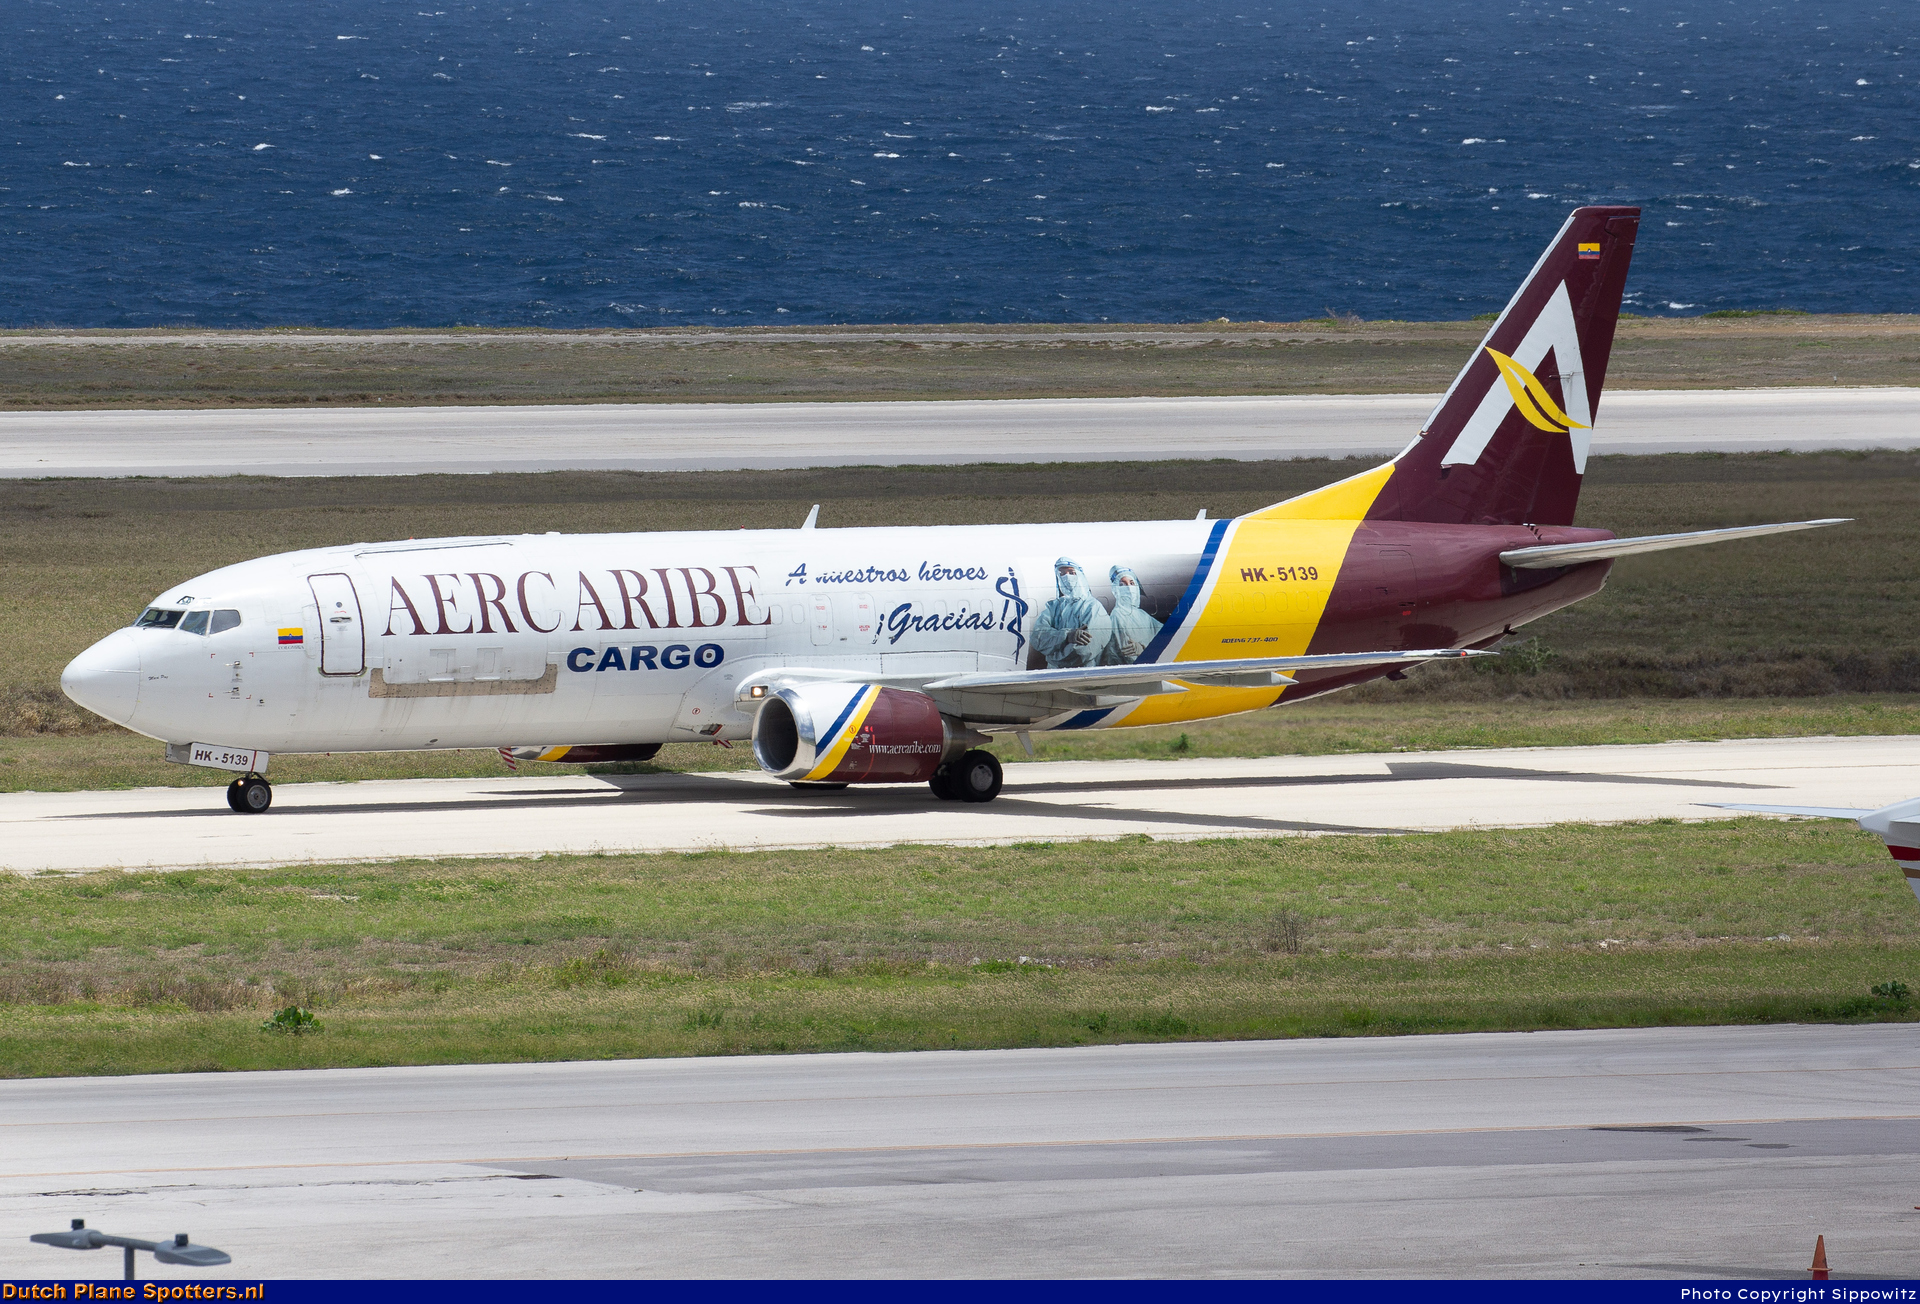 HK-5139 Boeing 737-400 AerCaribe by Sippowitz